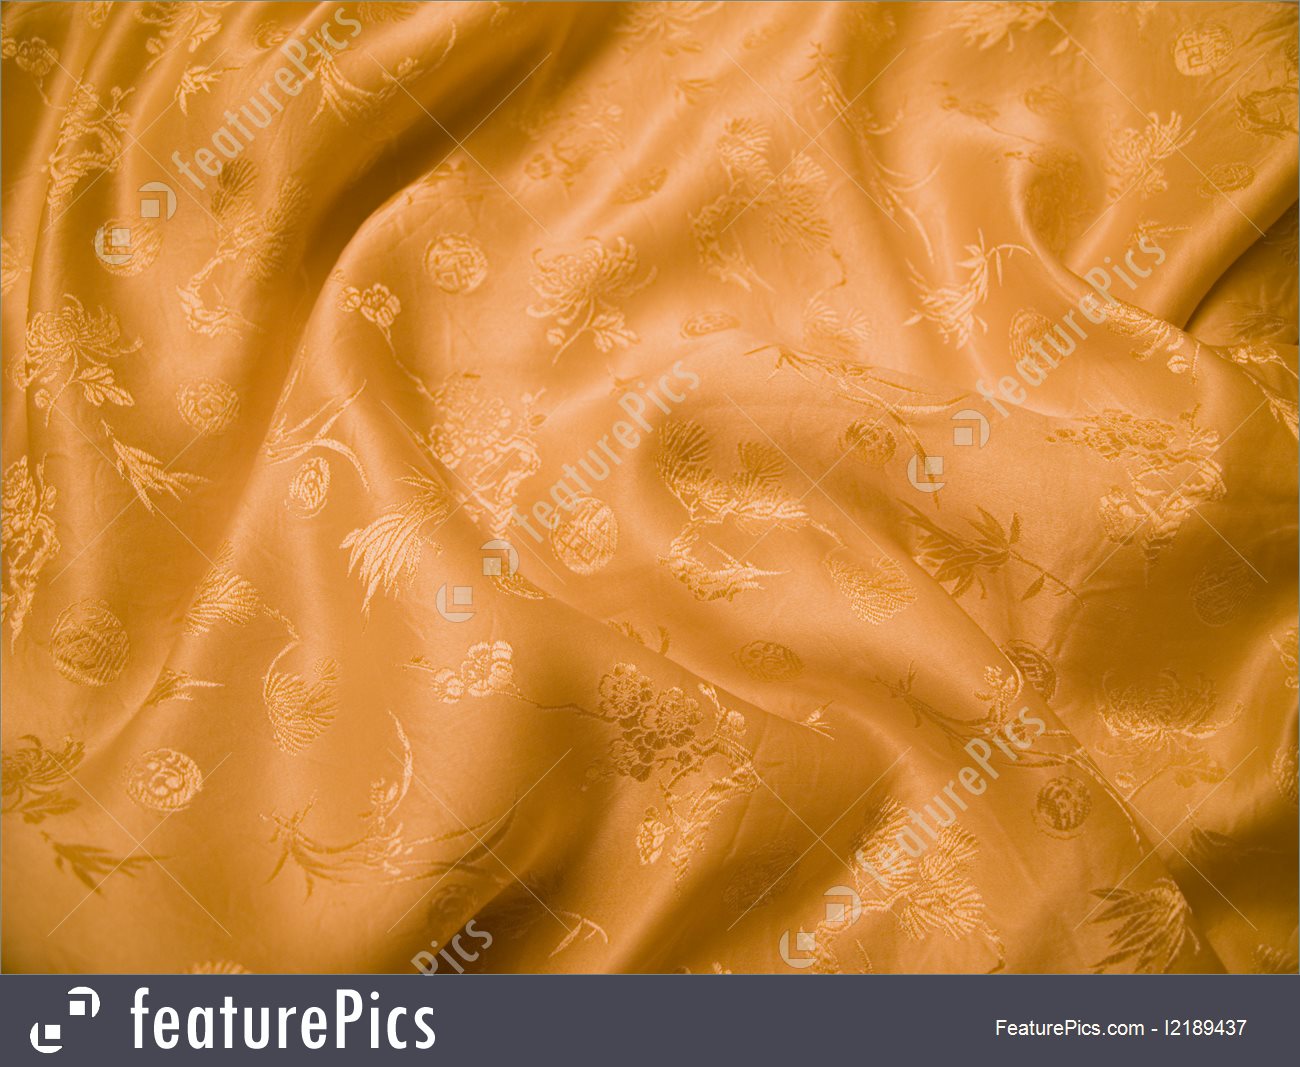 Texture Gold Silk Background Stock Picture I2189437 at FeaturePics